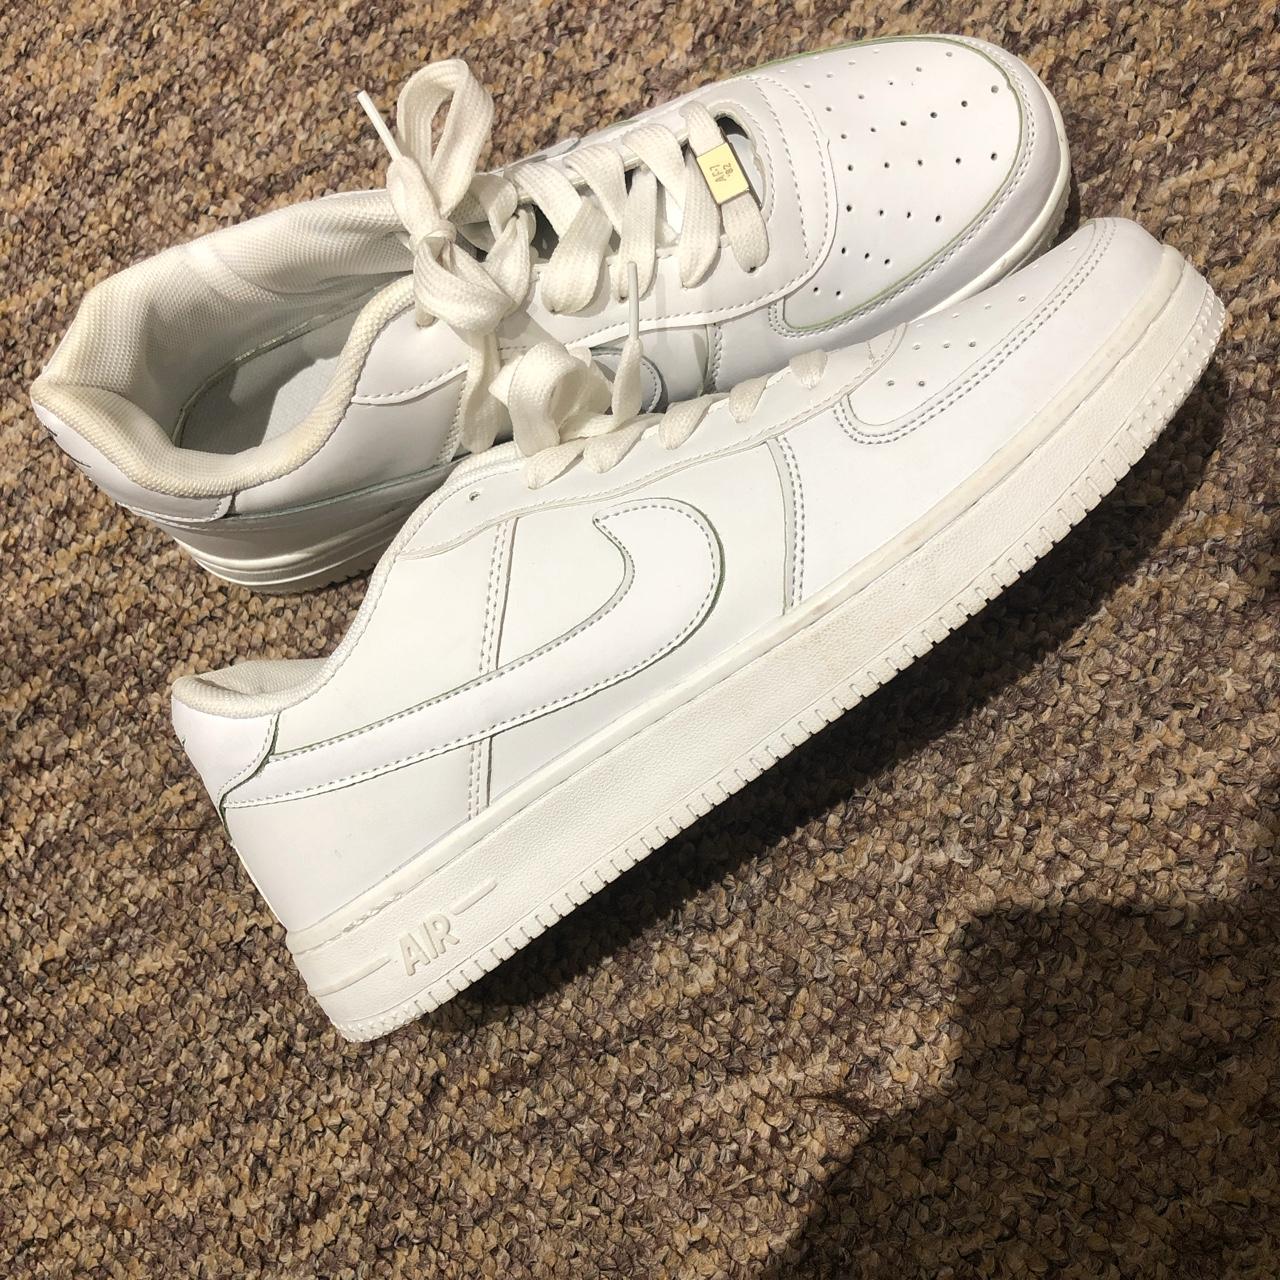 Never worn white airforces. Not sure about... - Depop